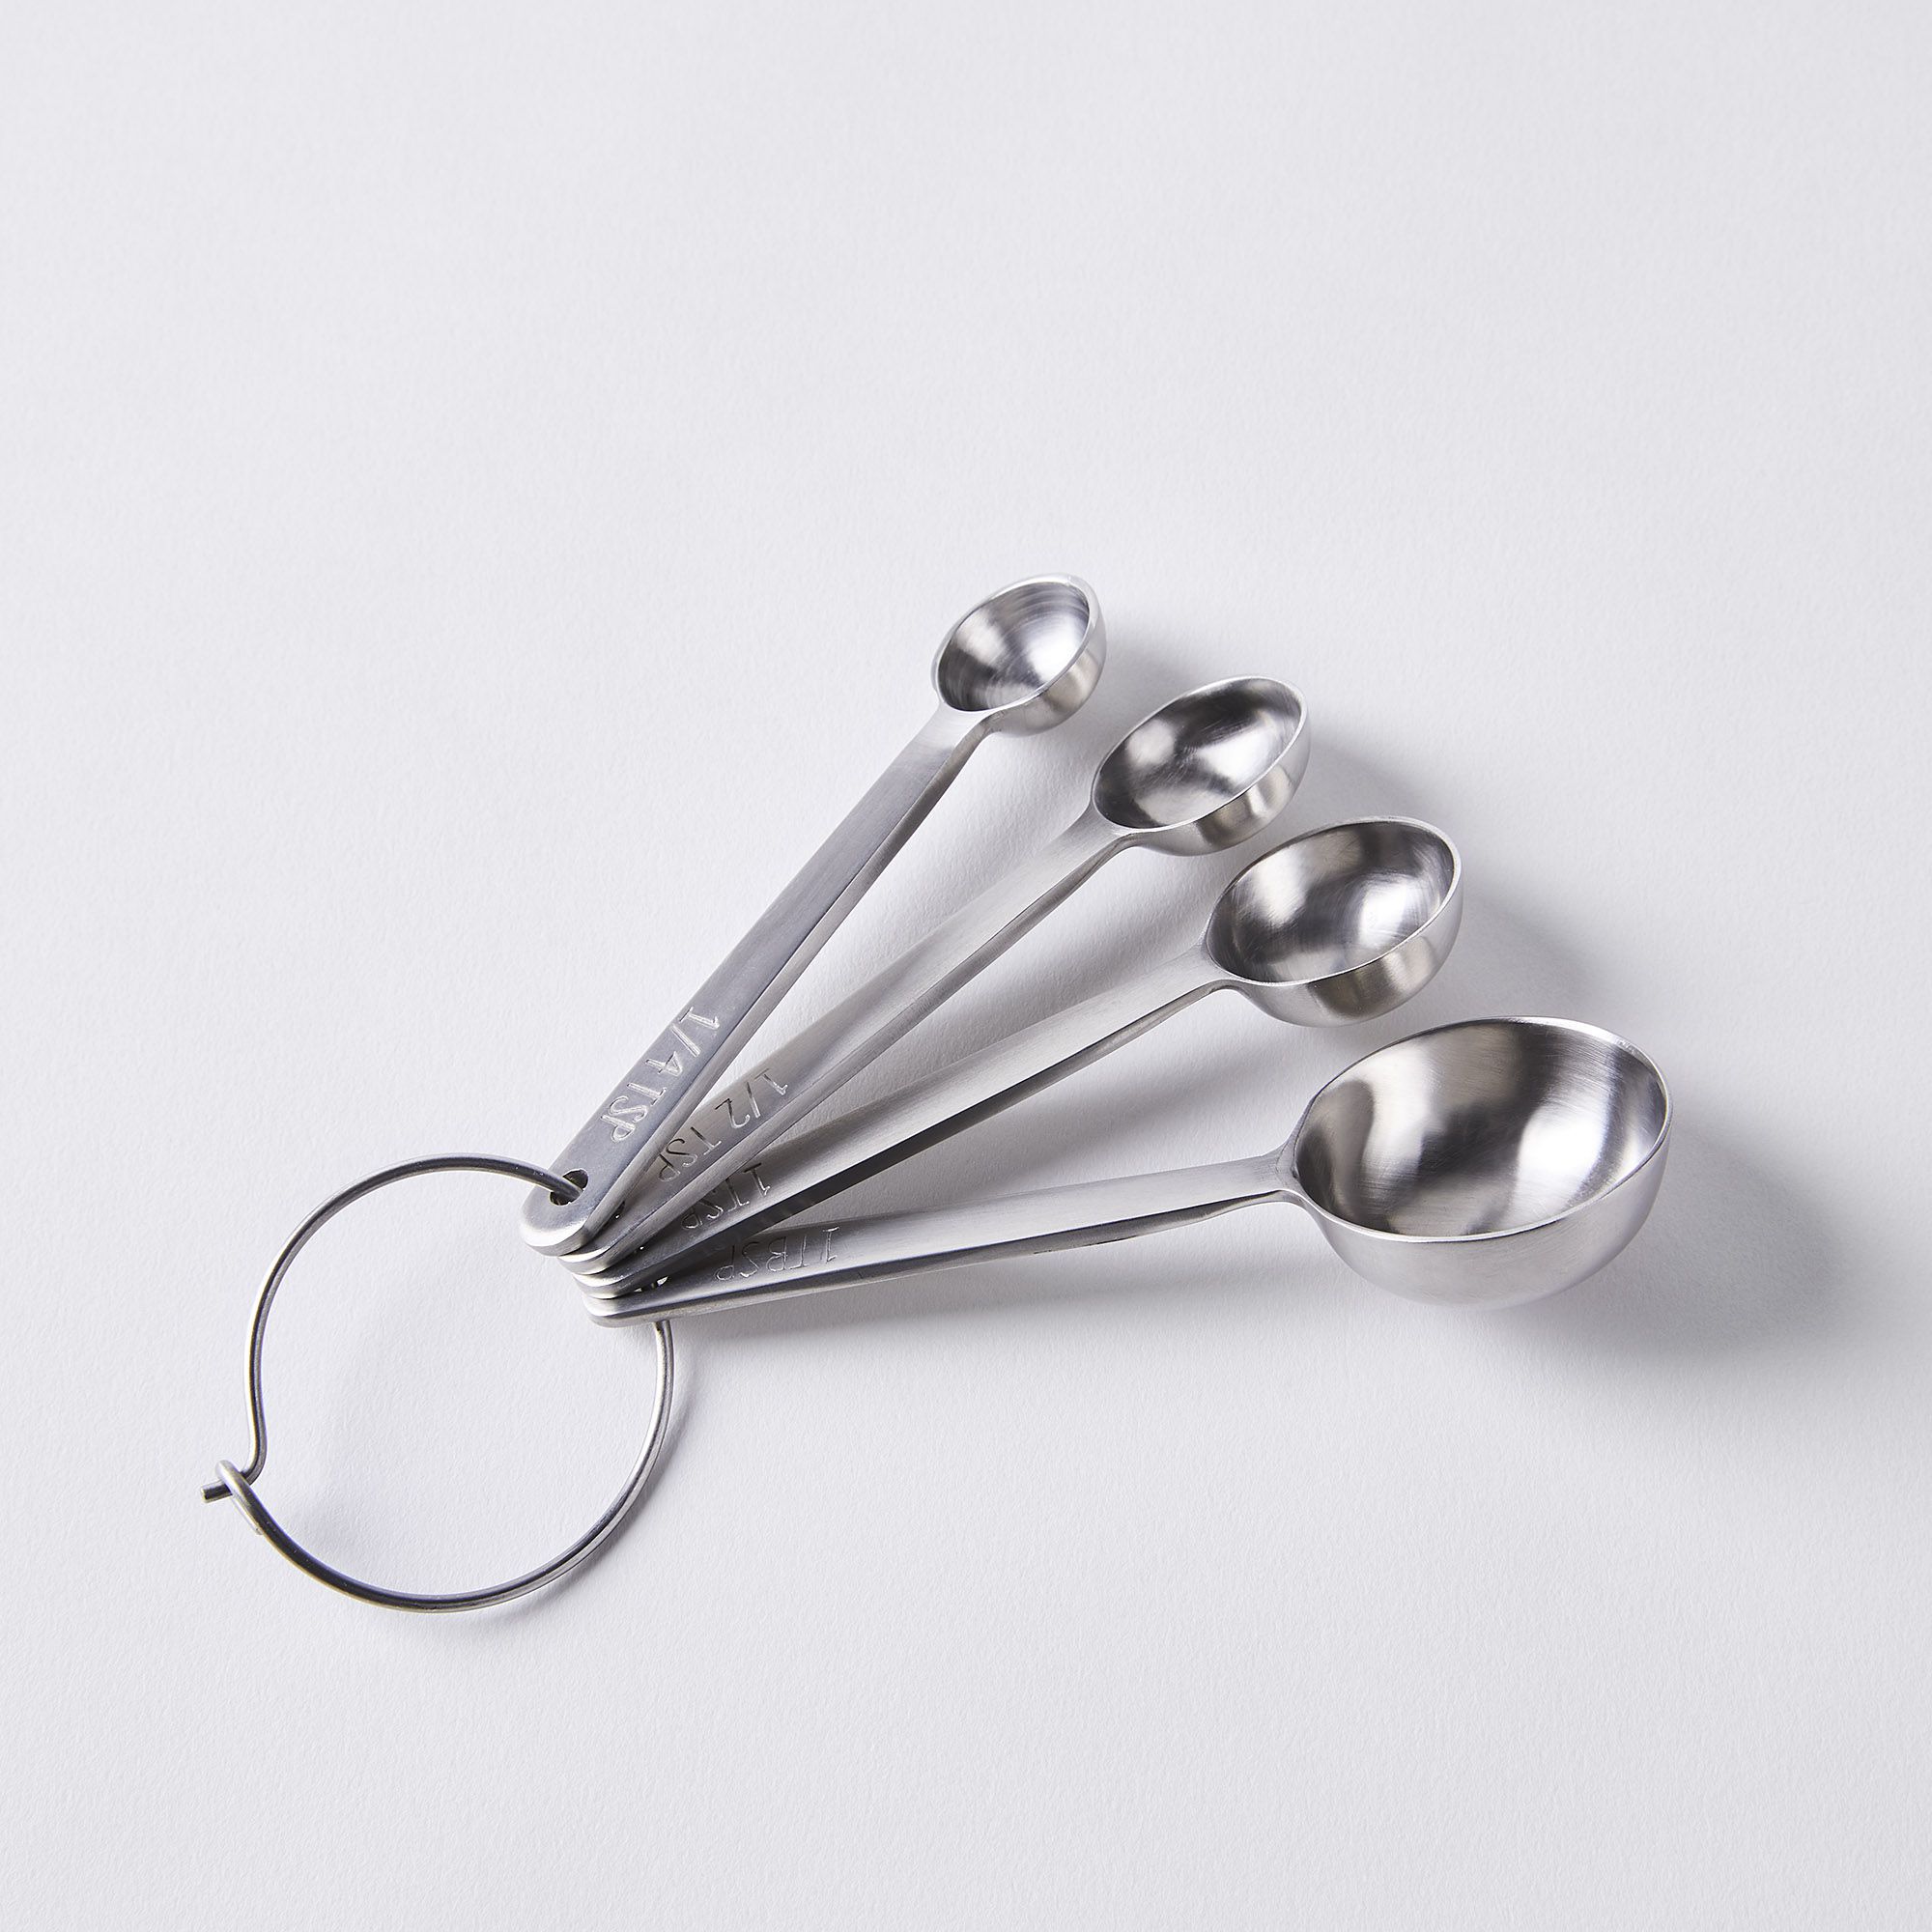 Professional Stainless Steel Measuring Spoons - Set of 5 by Farberware at  Fleet Farm